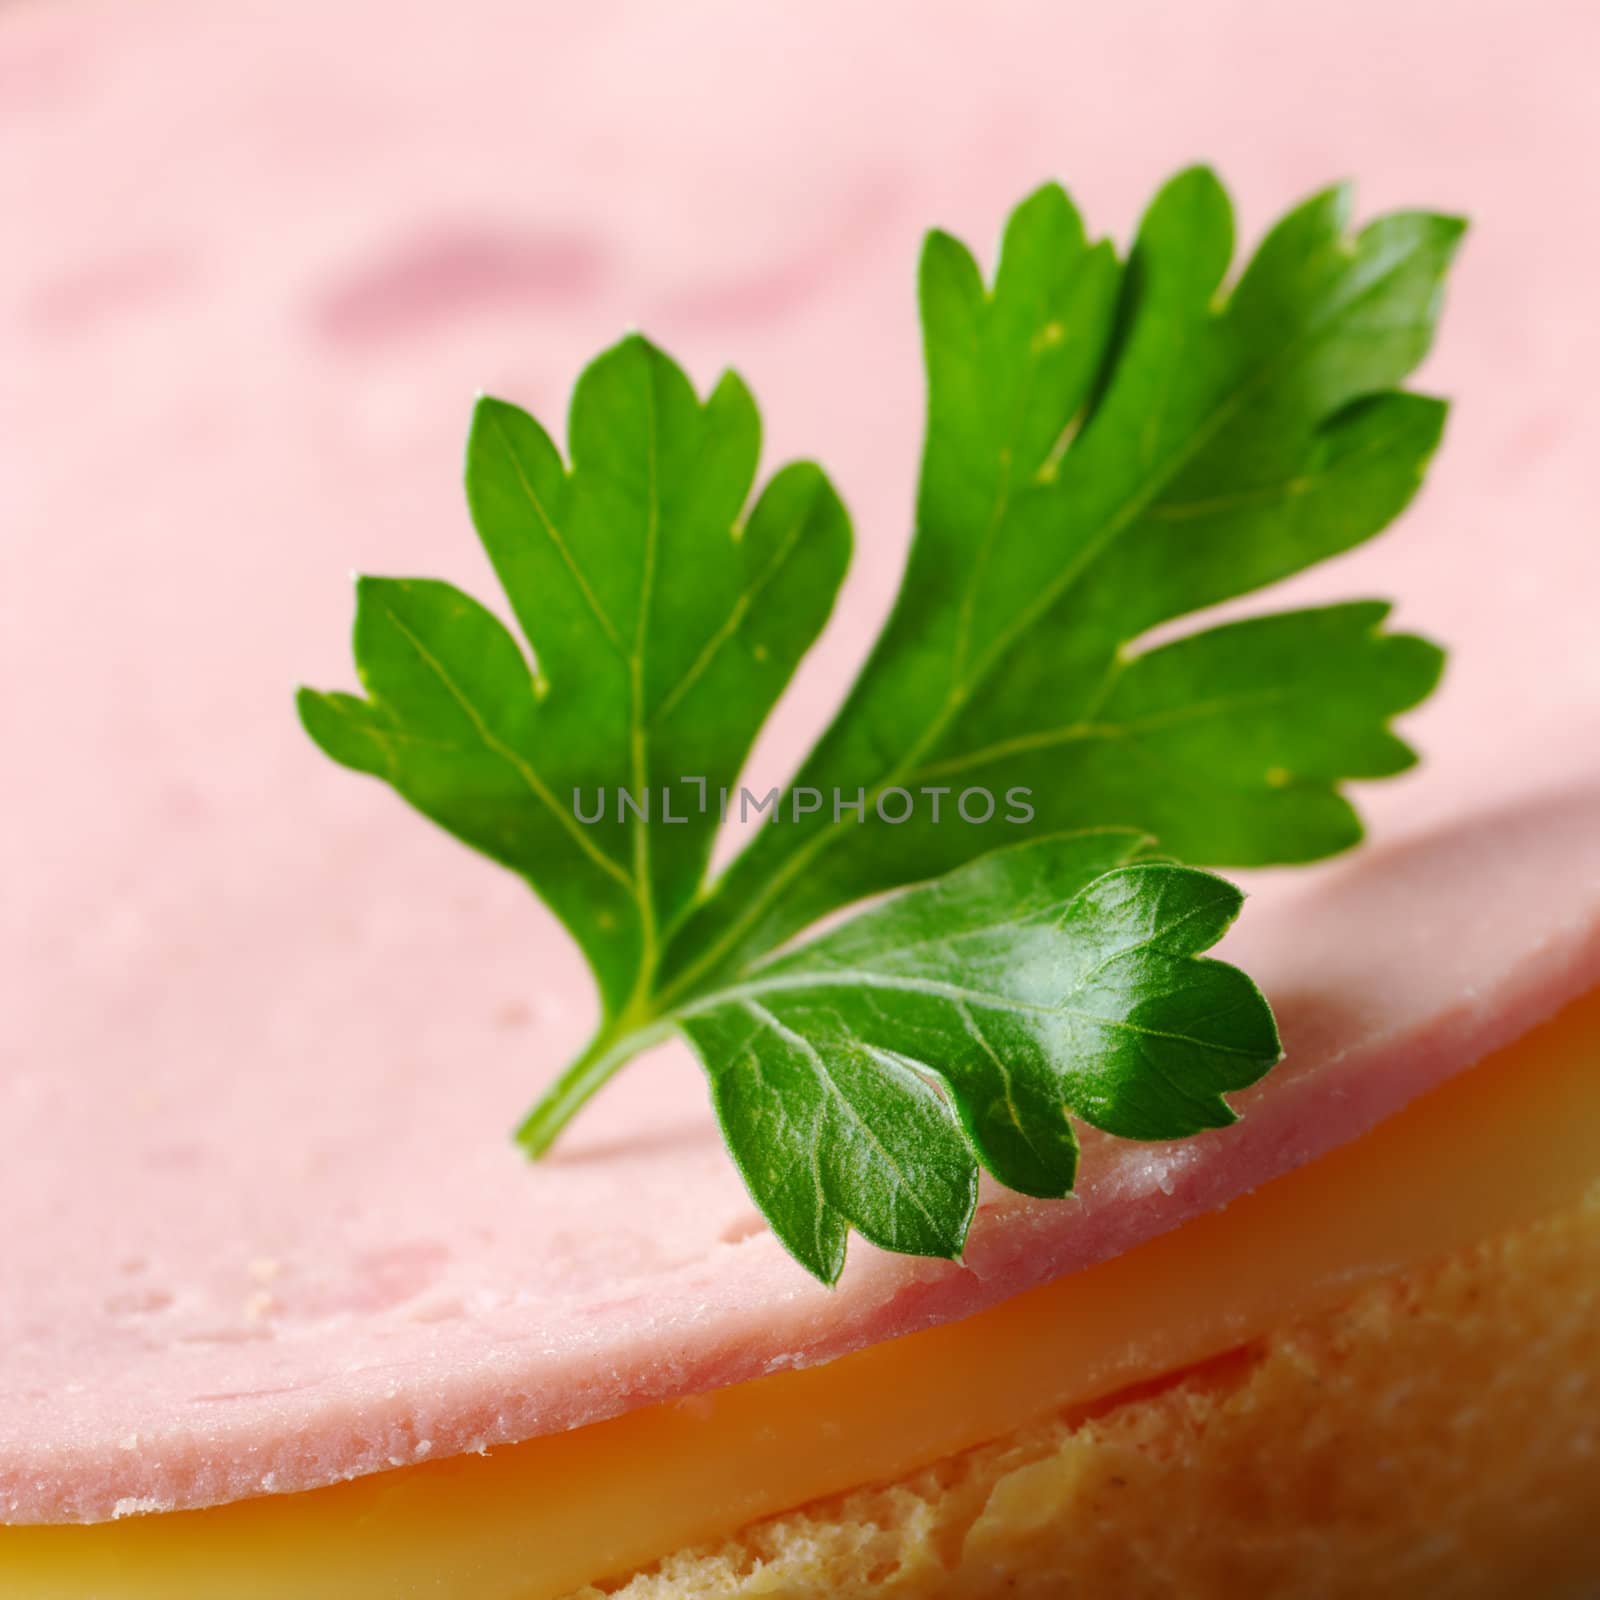 Parsley leaf on a cold cut and cheese sandwich (Very Shallow Depth of Field, Focus on the front of the parsley and the front of the cold cut slice)